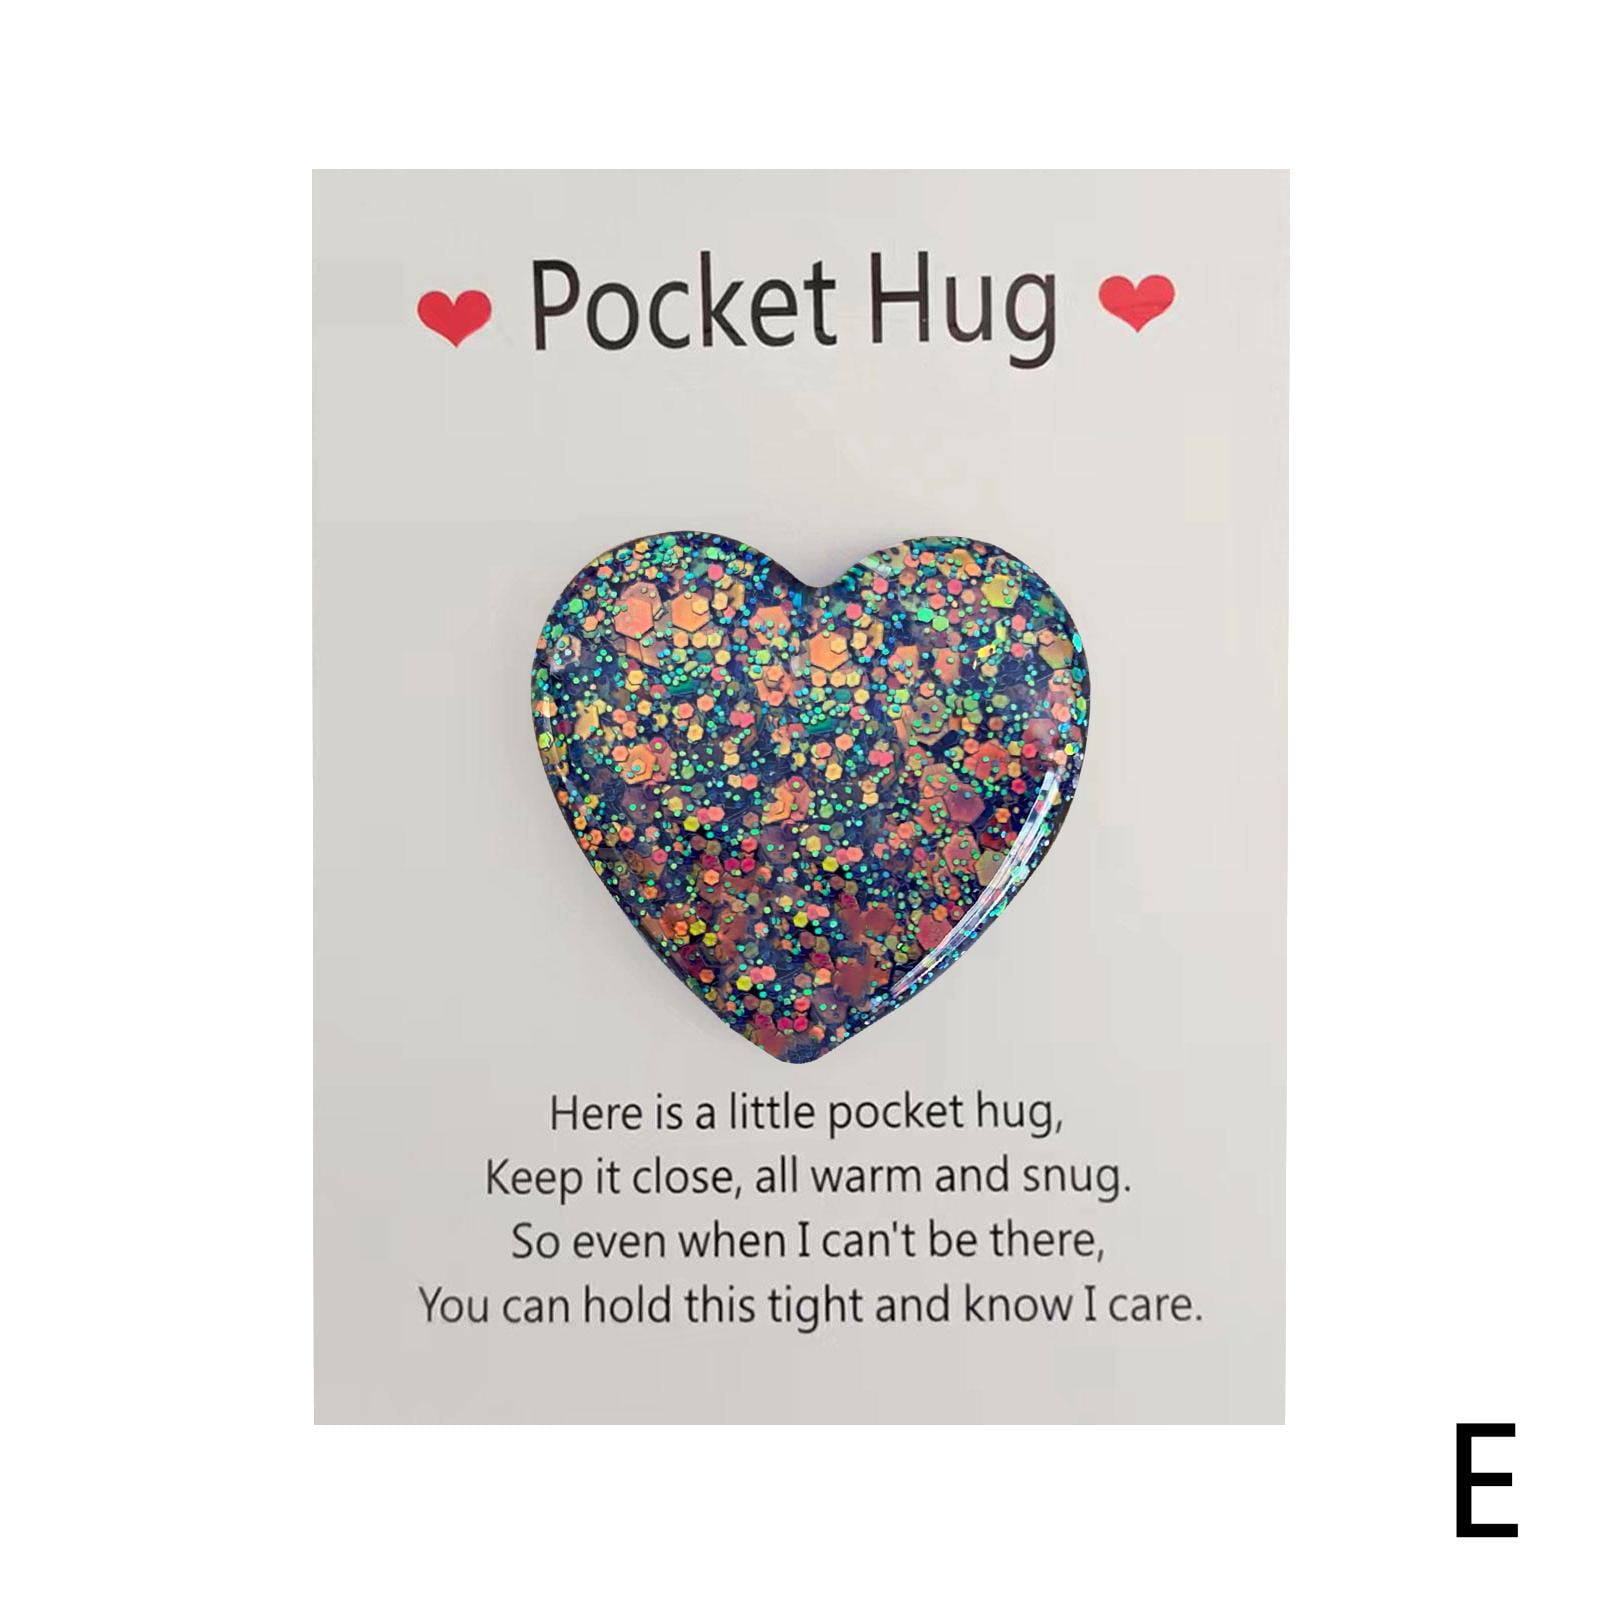 RYGRZJ Pocket Hug Heart with Greeting Cards,Little Heart Pocket Hug  Token,Mini Cute Pocket Hug Decoration Gifts for Birthday Valentines  Thanksgiving